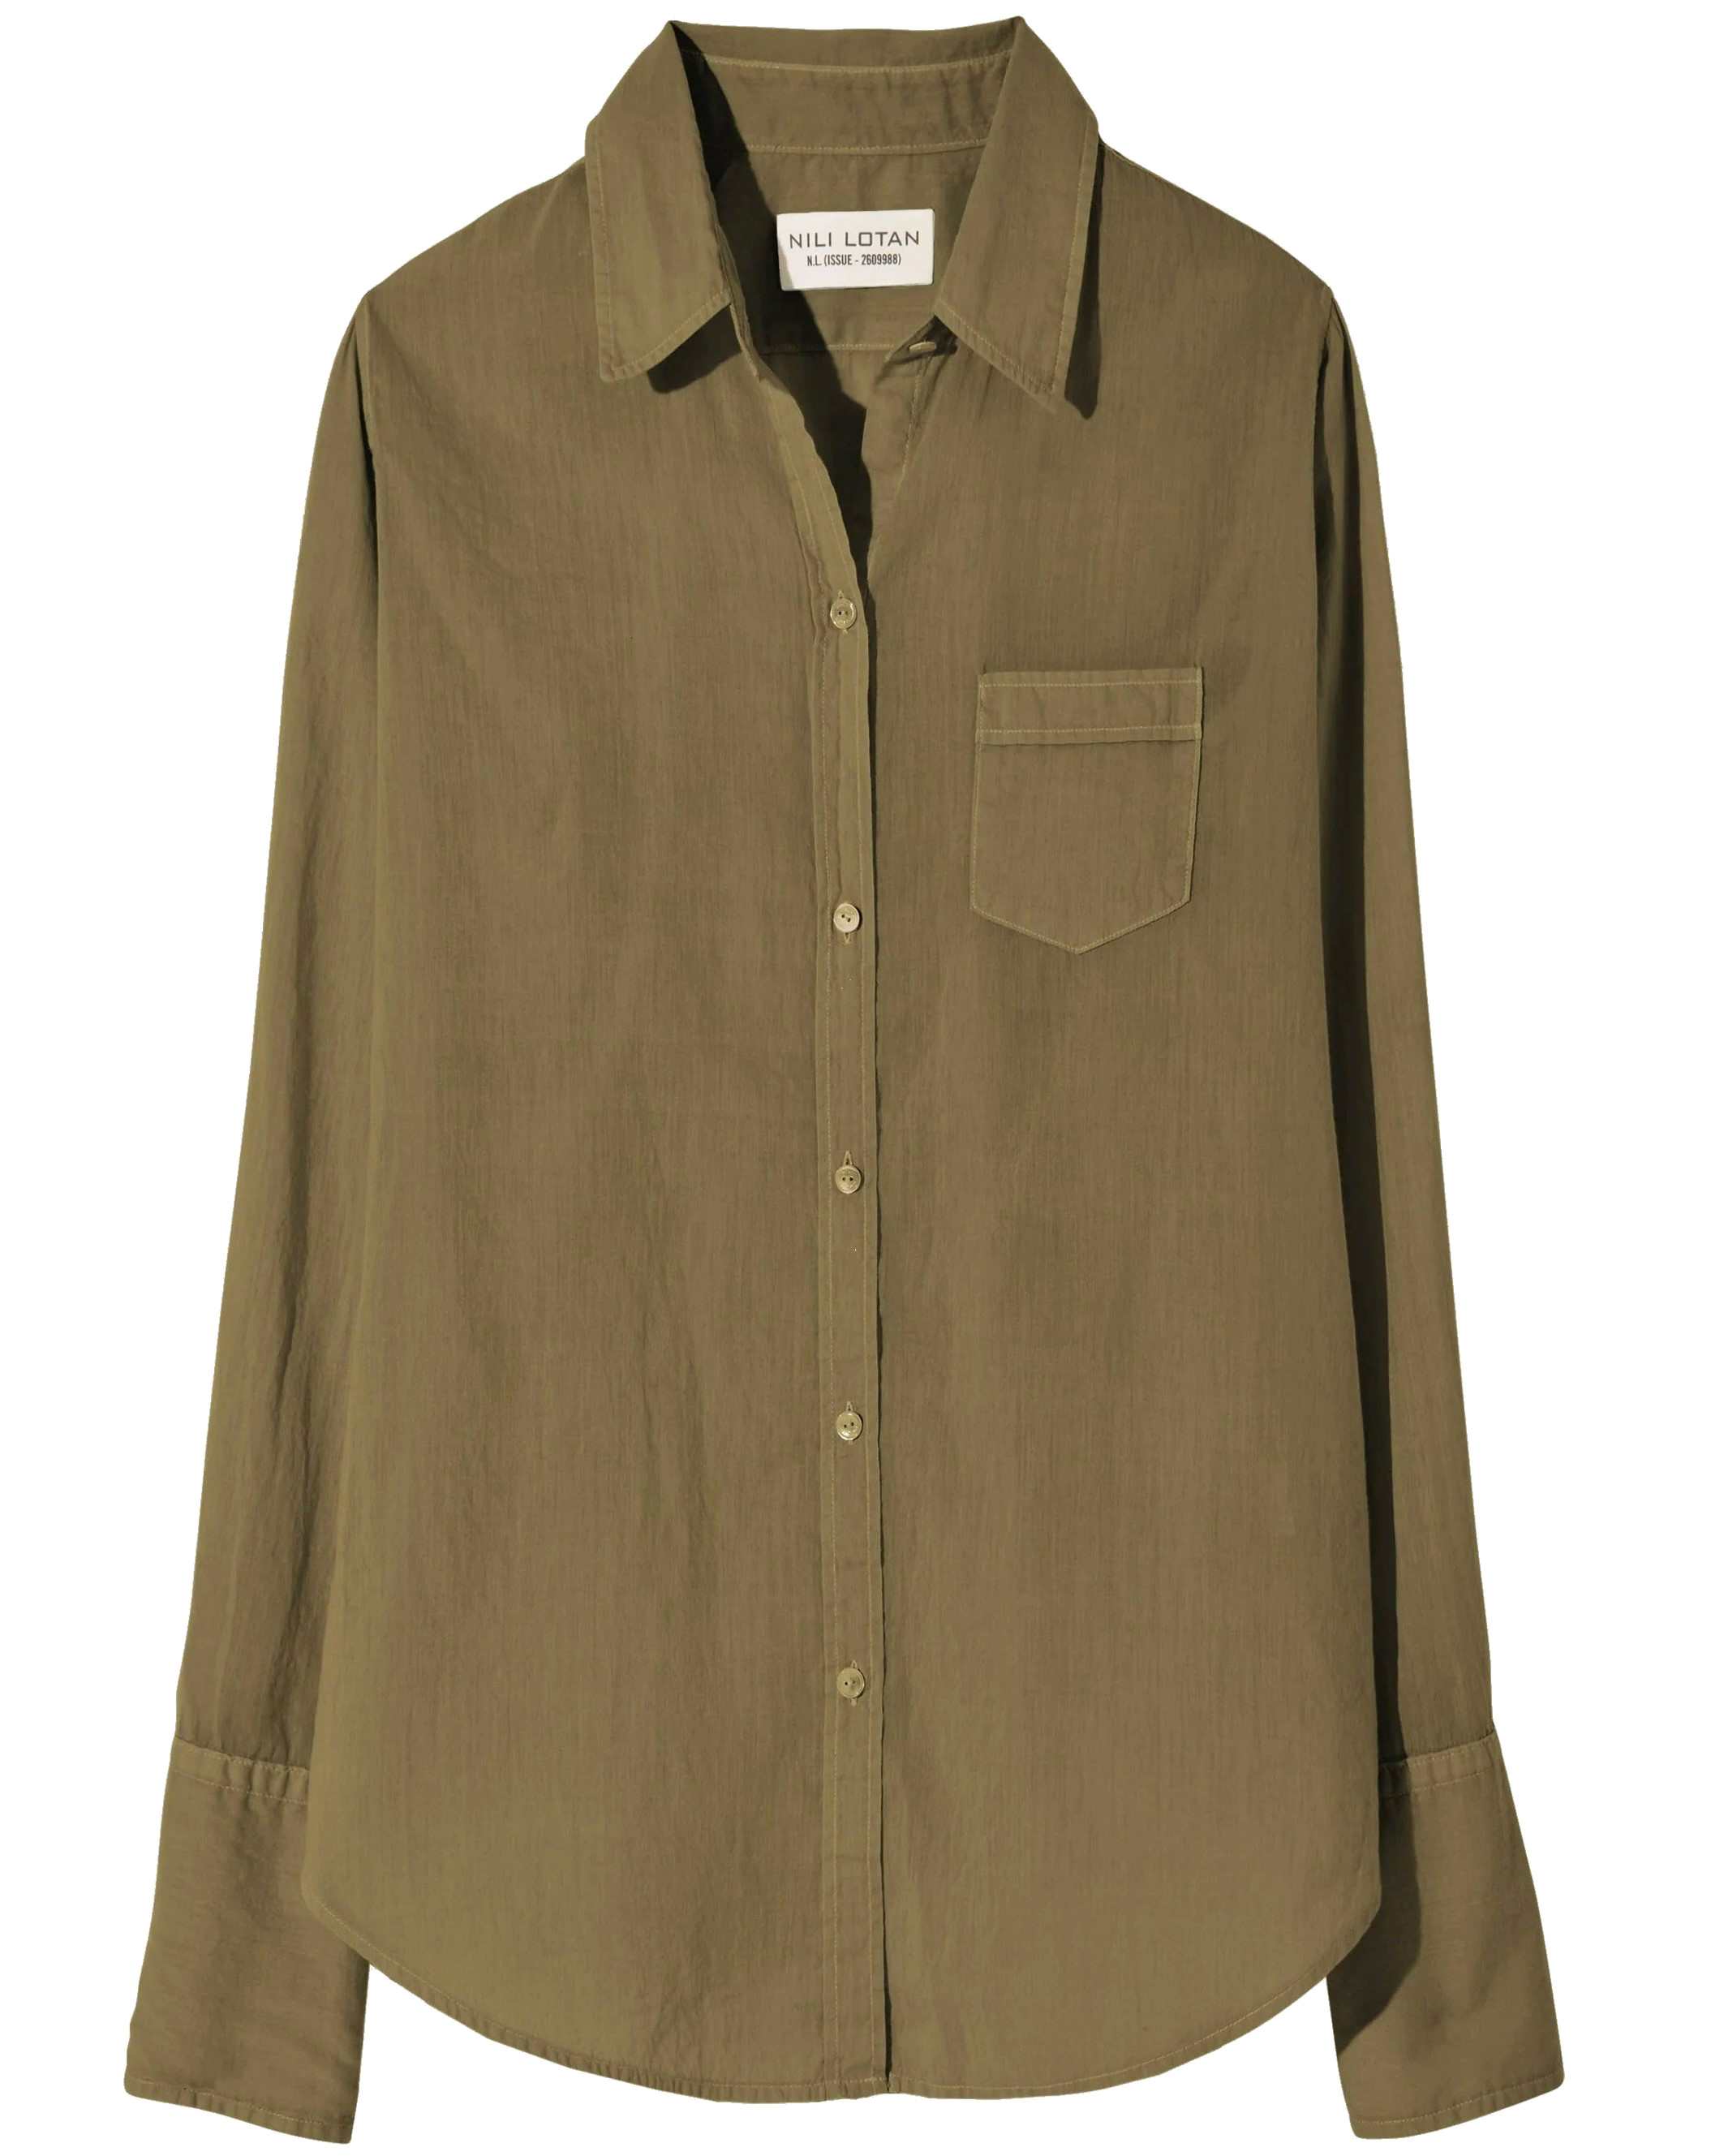 NILI LOTAN Cotton Voile NL Shirt in Olive Green